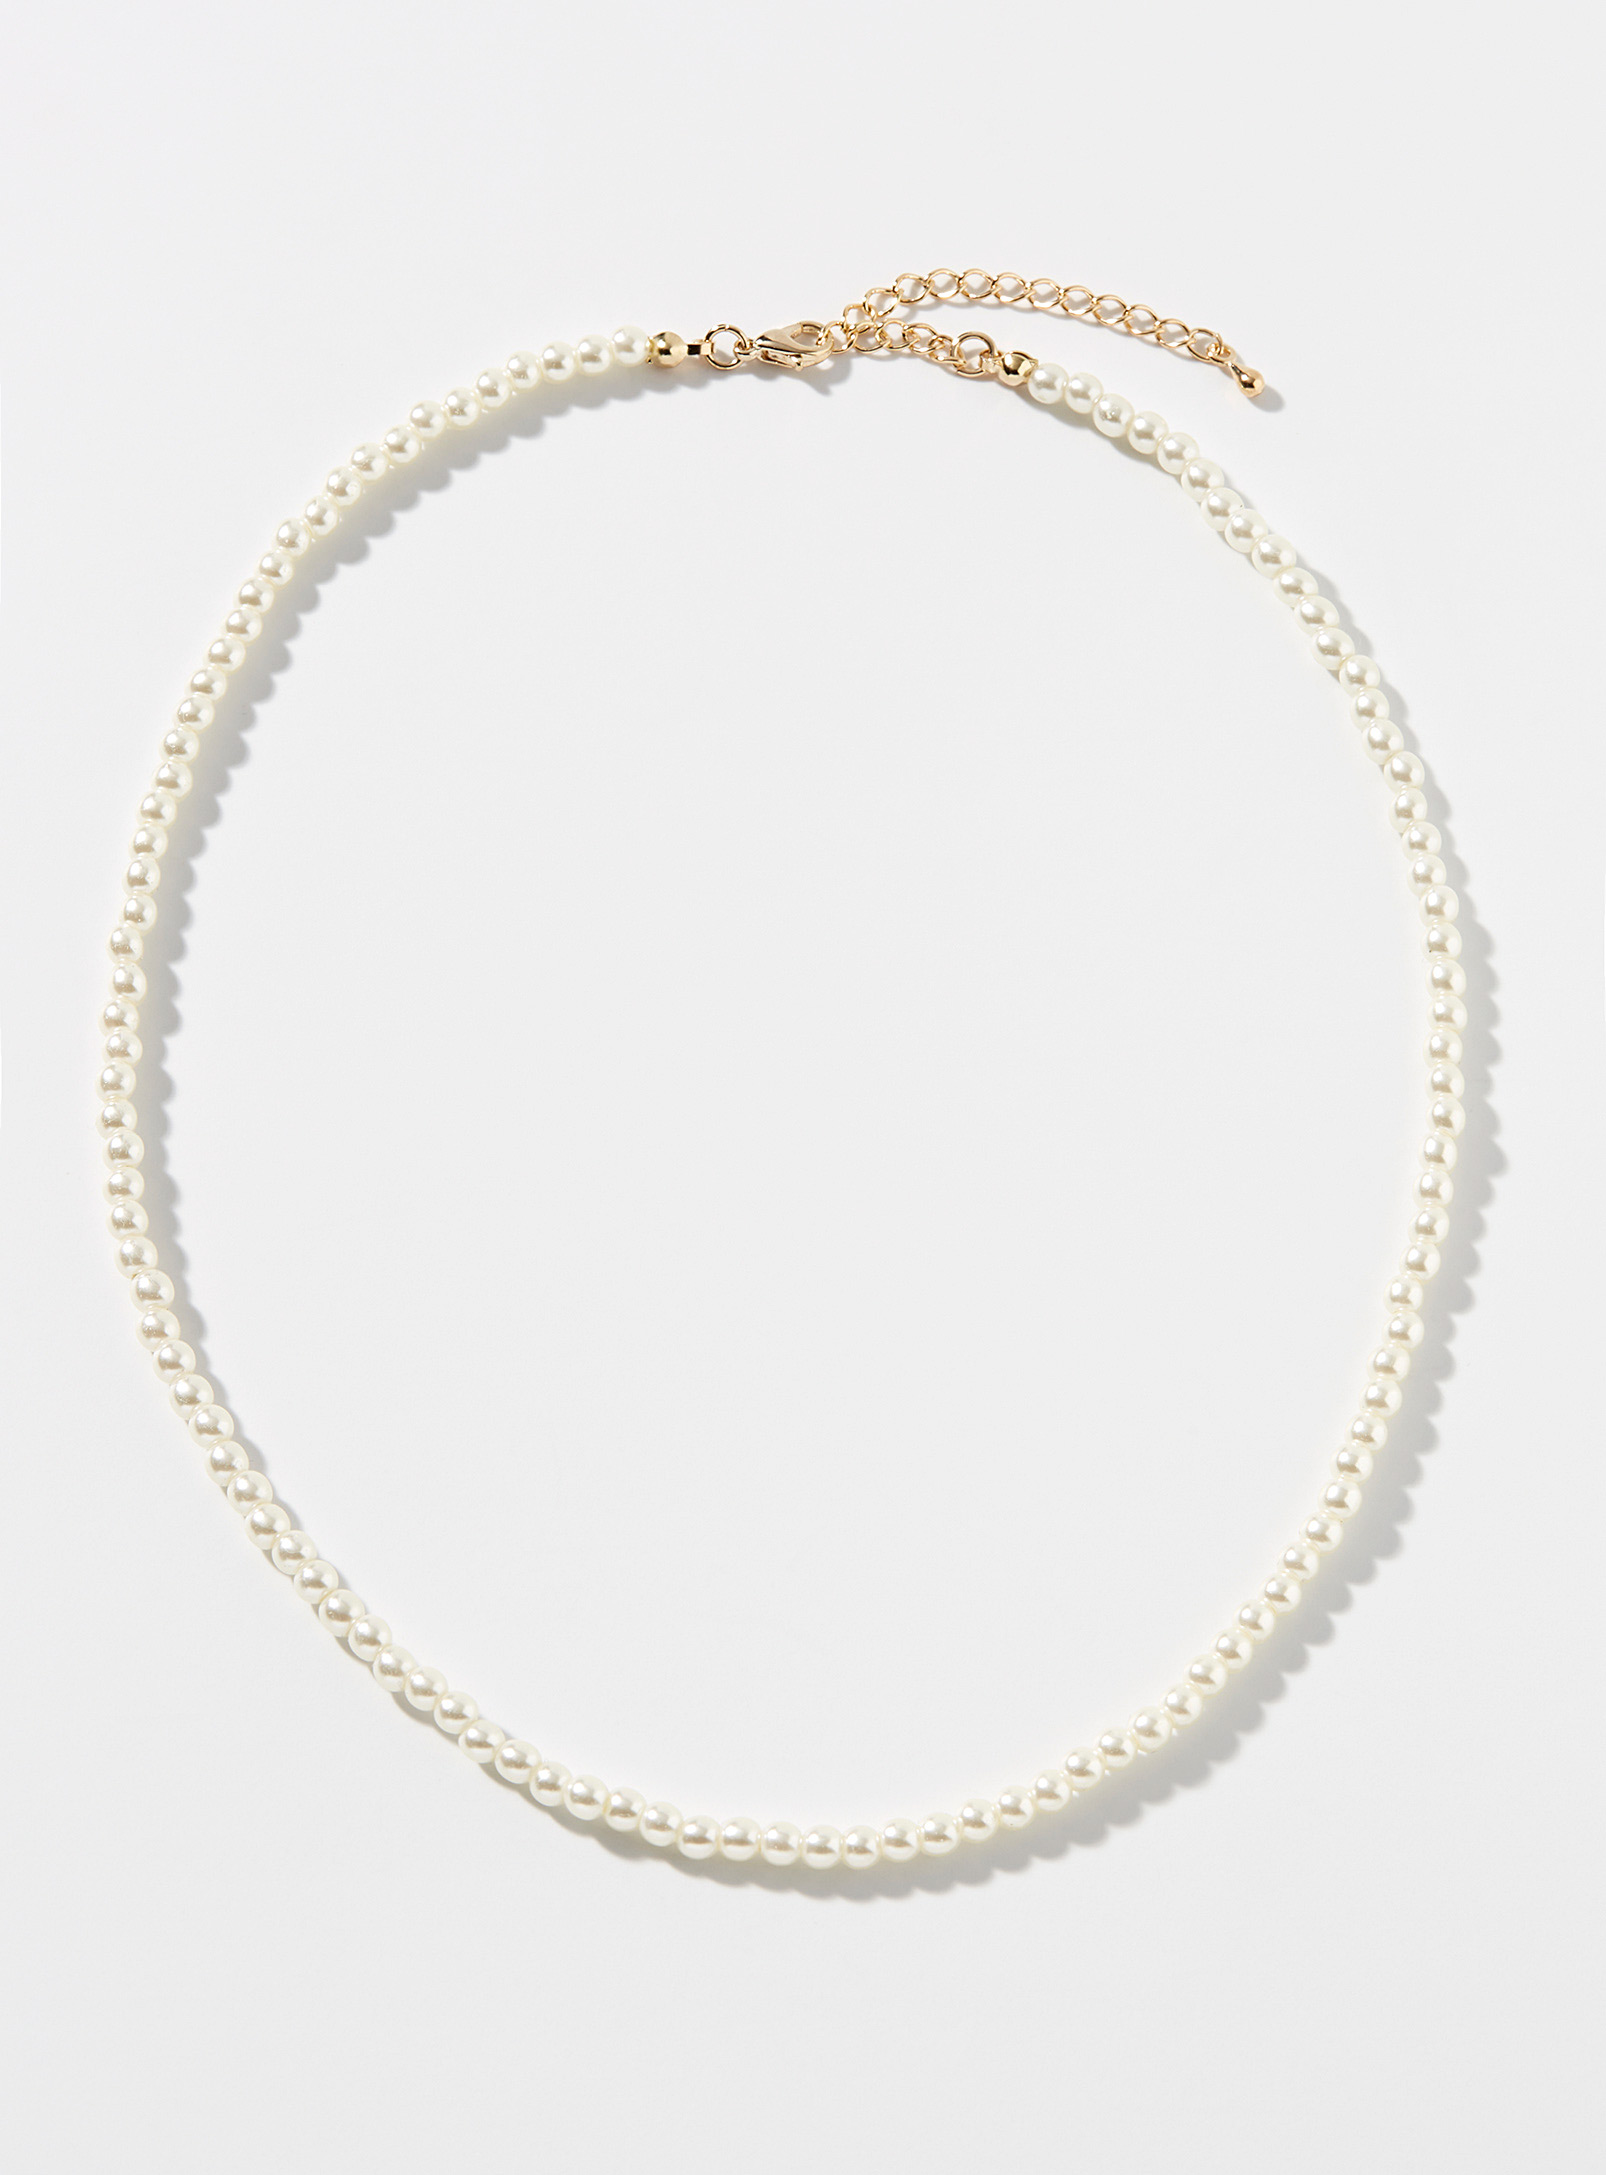 Simons - Women's Small pearly bead necklace